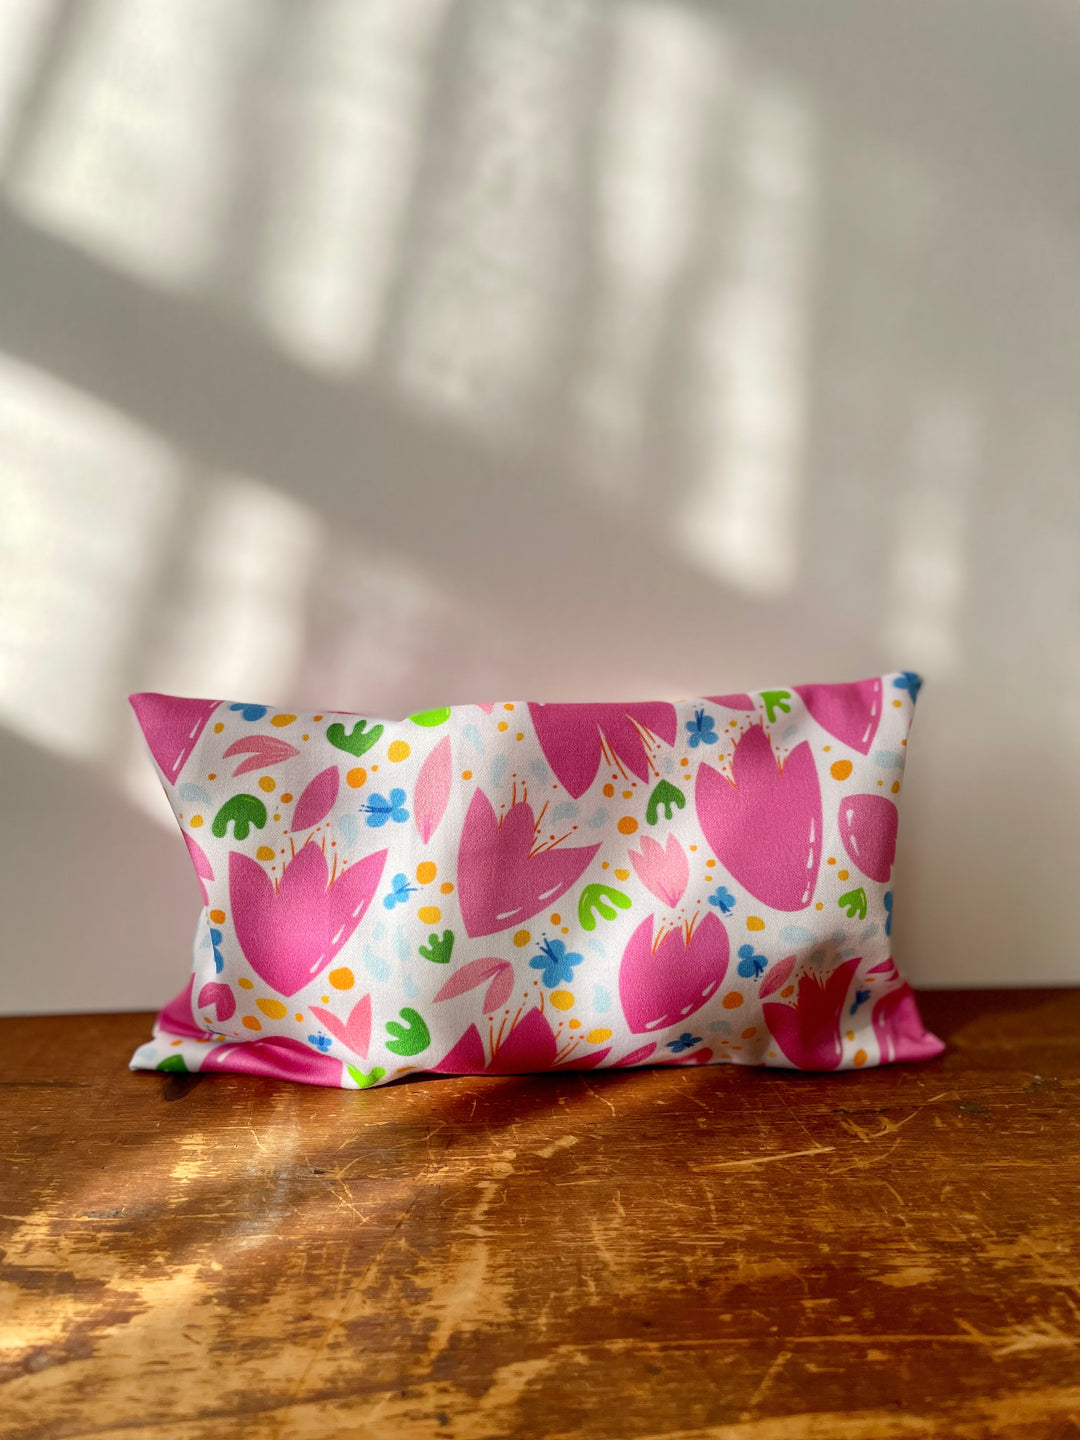 Scented Serenity Eye Pillow - Breezy Tulips Pattern w. White Details (Grow & Bloom Collection)